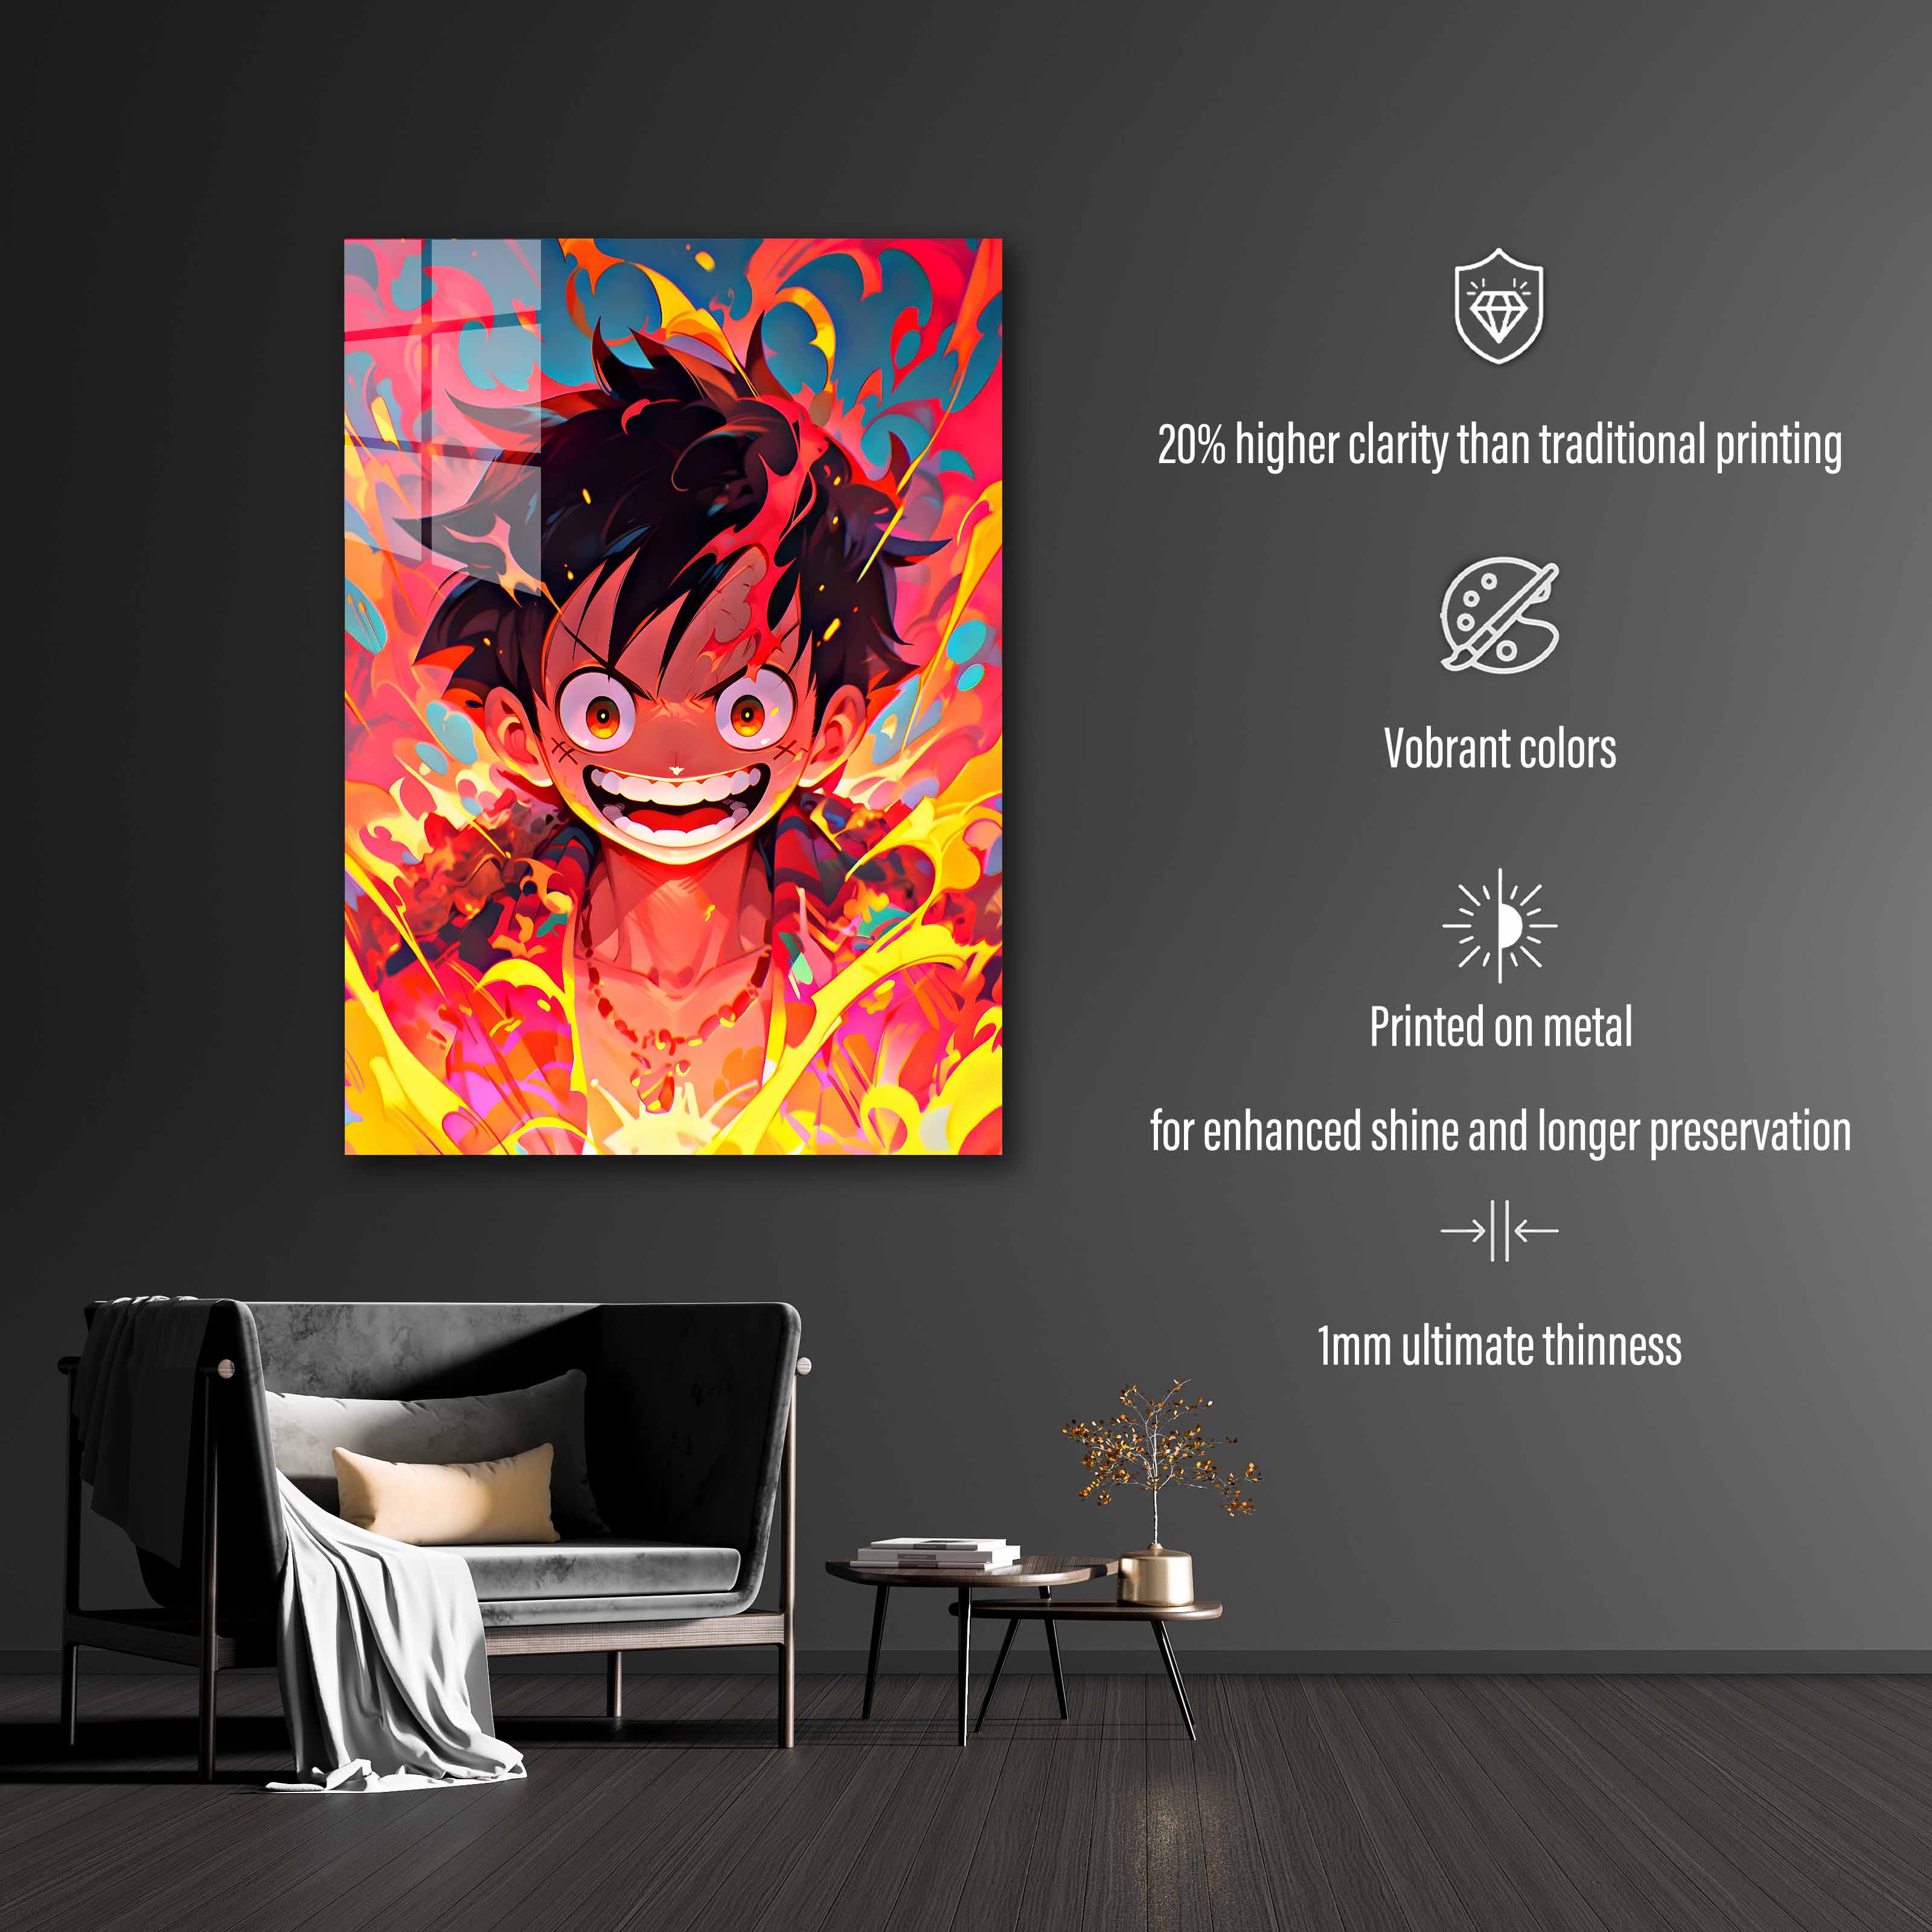 Luffy smiling from one piece-designed by @Vid_M@tion